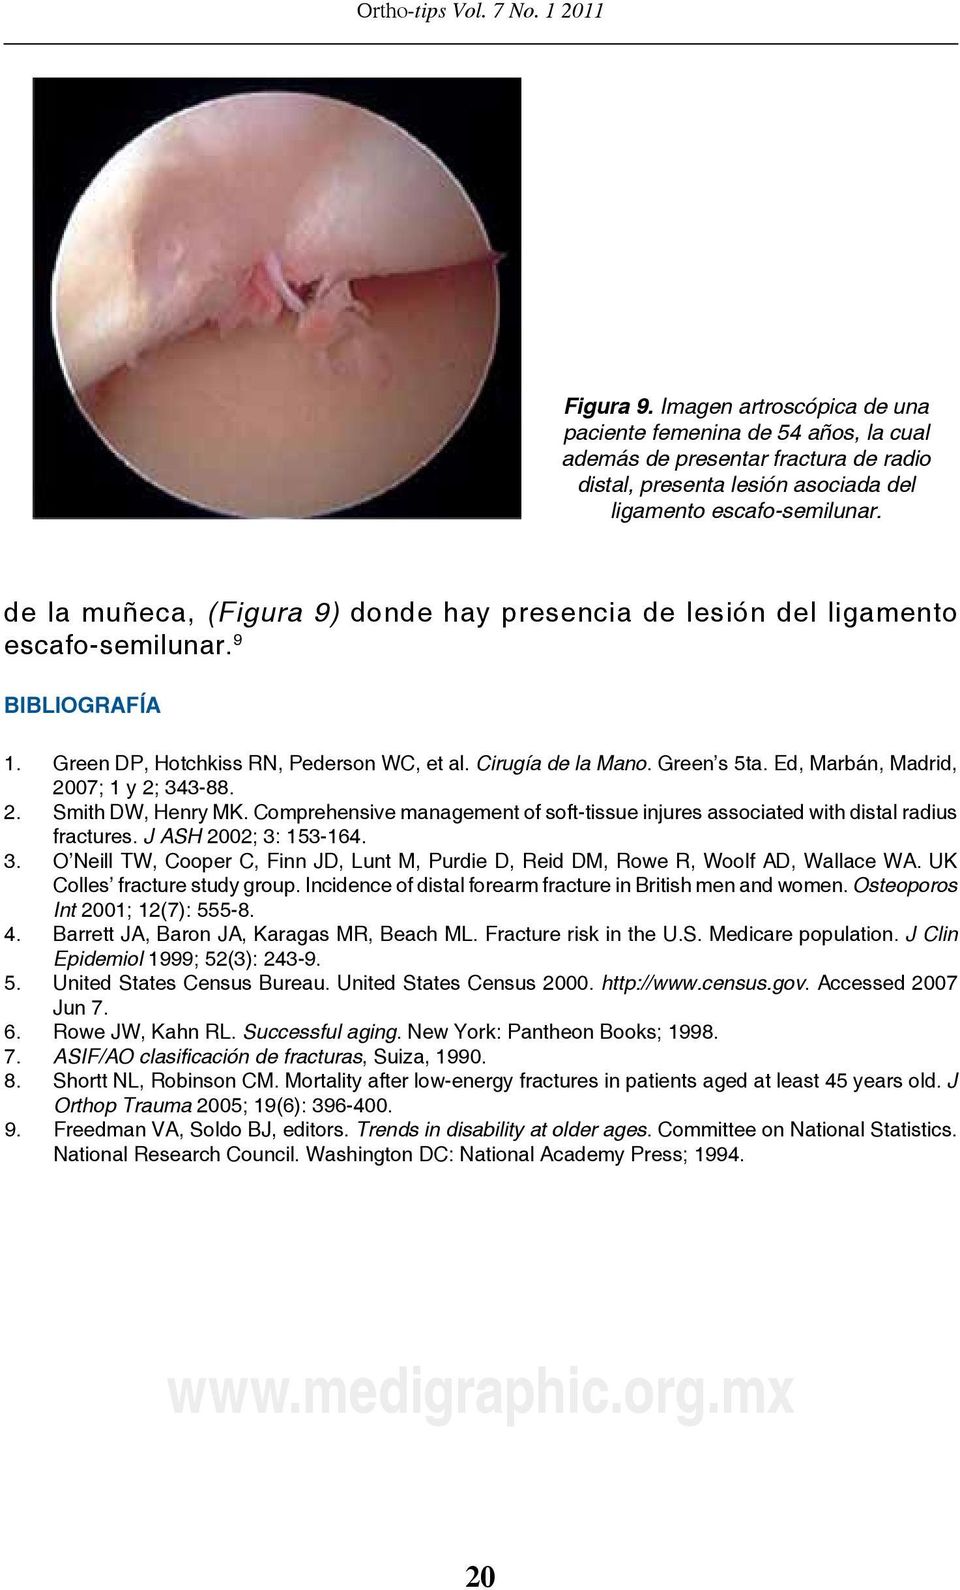 Ed, Marbán, Madrid, 007; y ; -88.. Smith DW, Henry MK. Comprehensive management of soft-tissue injures associated with distal radius fractures. J ASH 00; : 5-6.